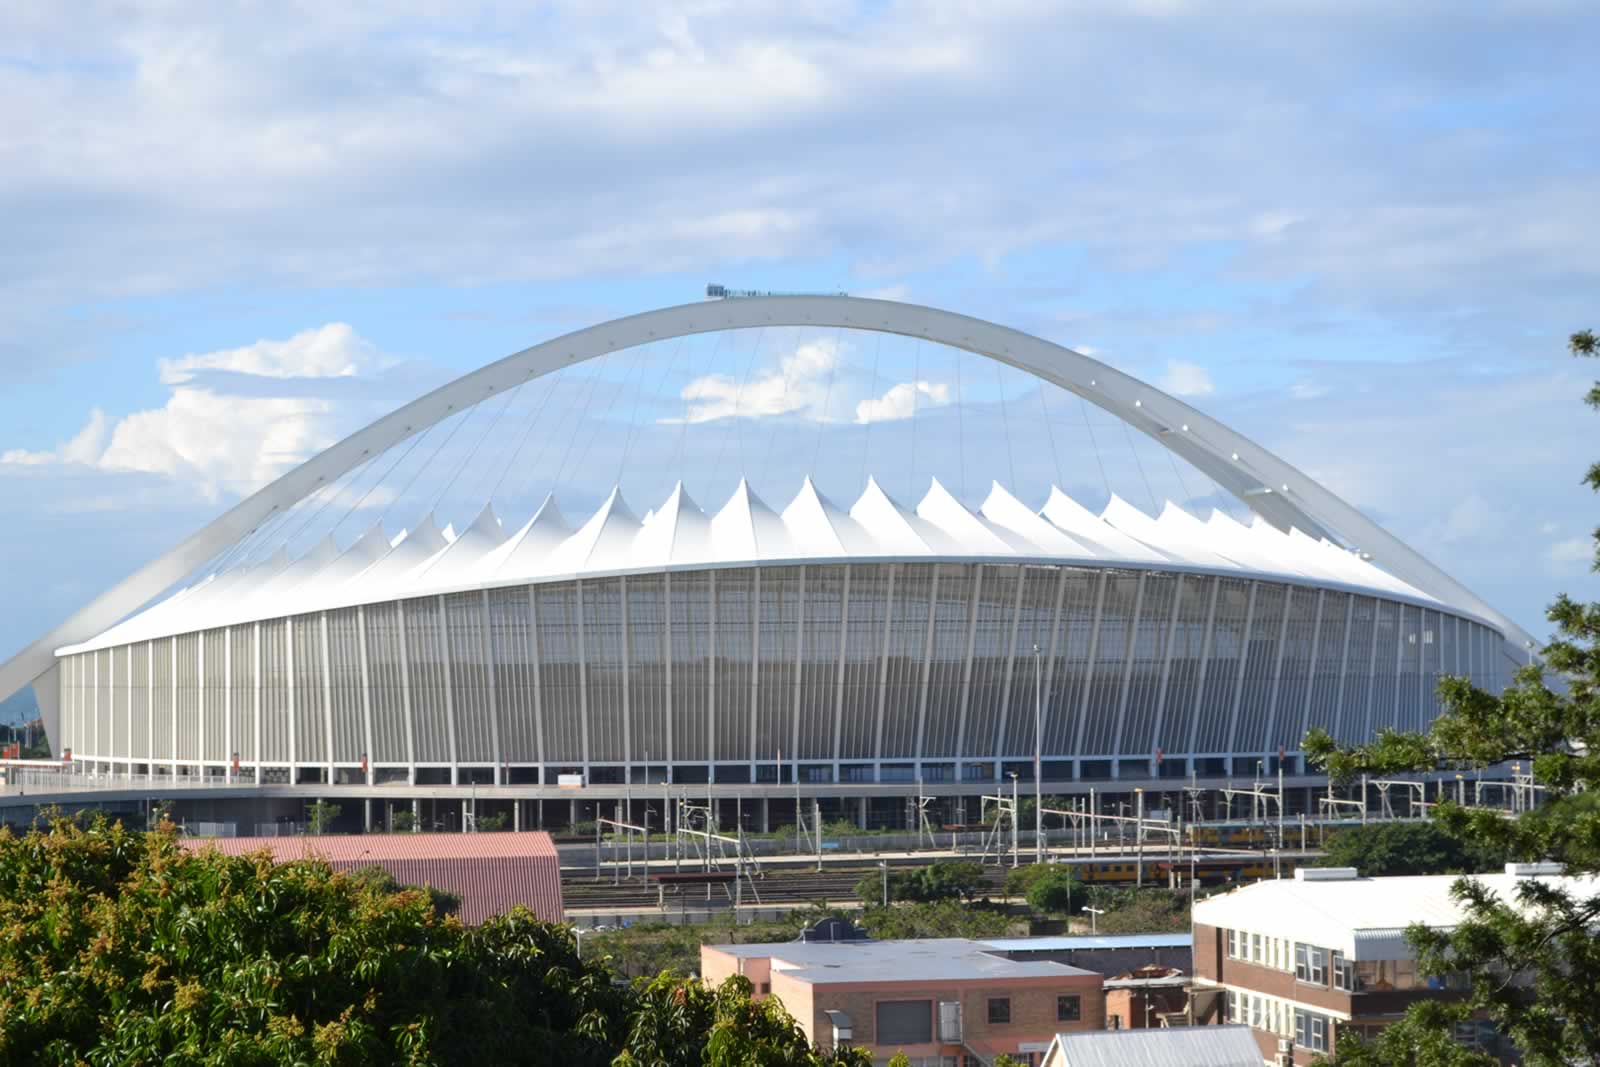 The Moses Mabhida Stadium, built for the 2010 FIFA World Cup, gives Durban a head start in its preparations for the 2022 Commonwealth Games ©Getty Images